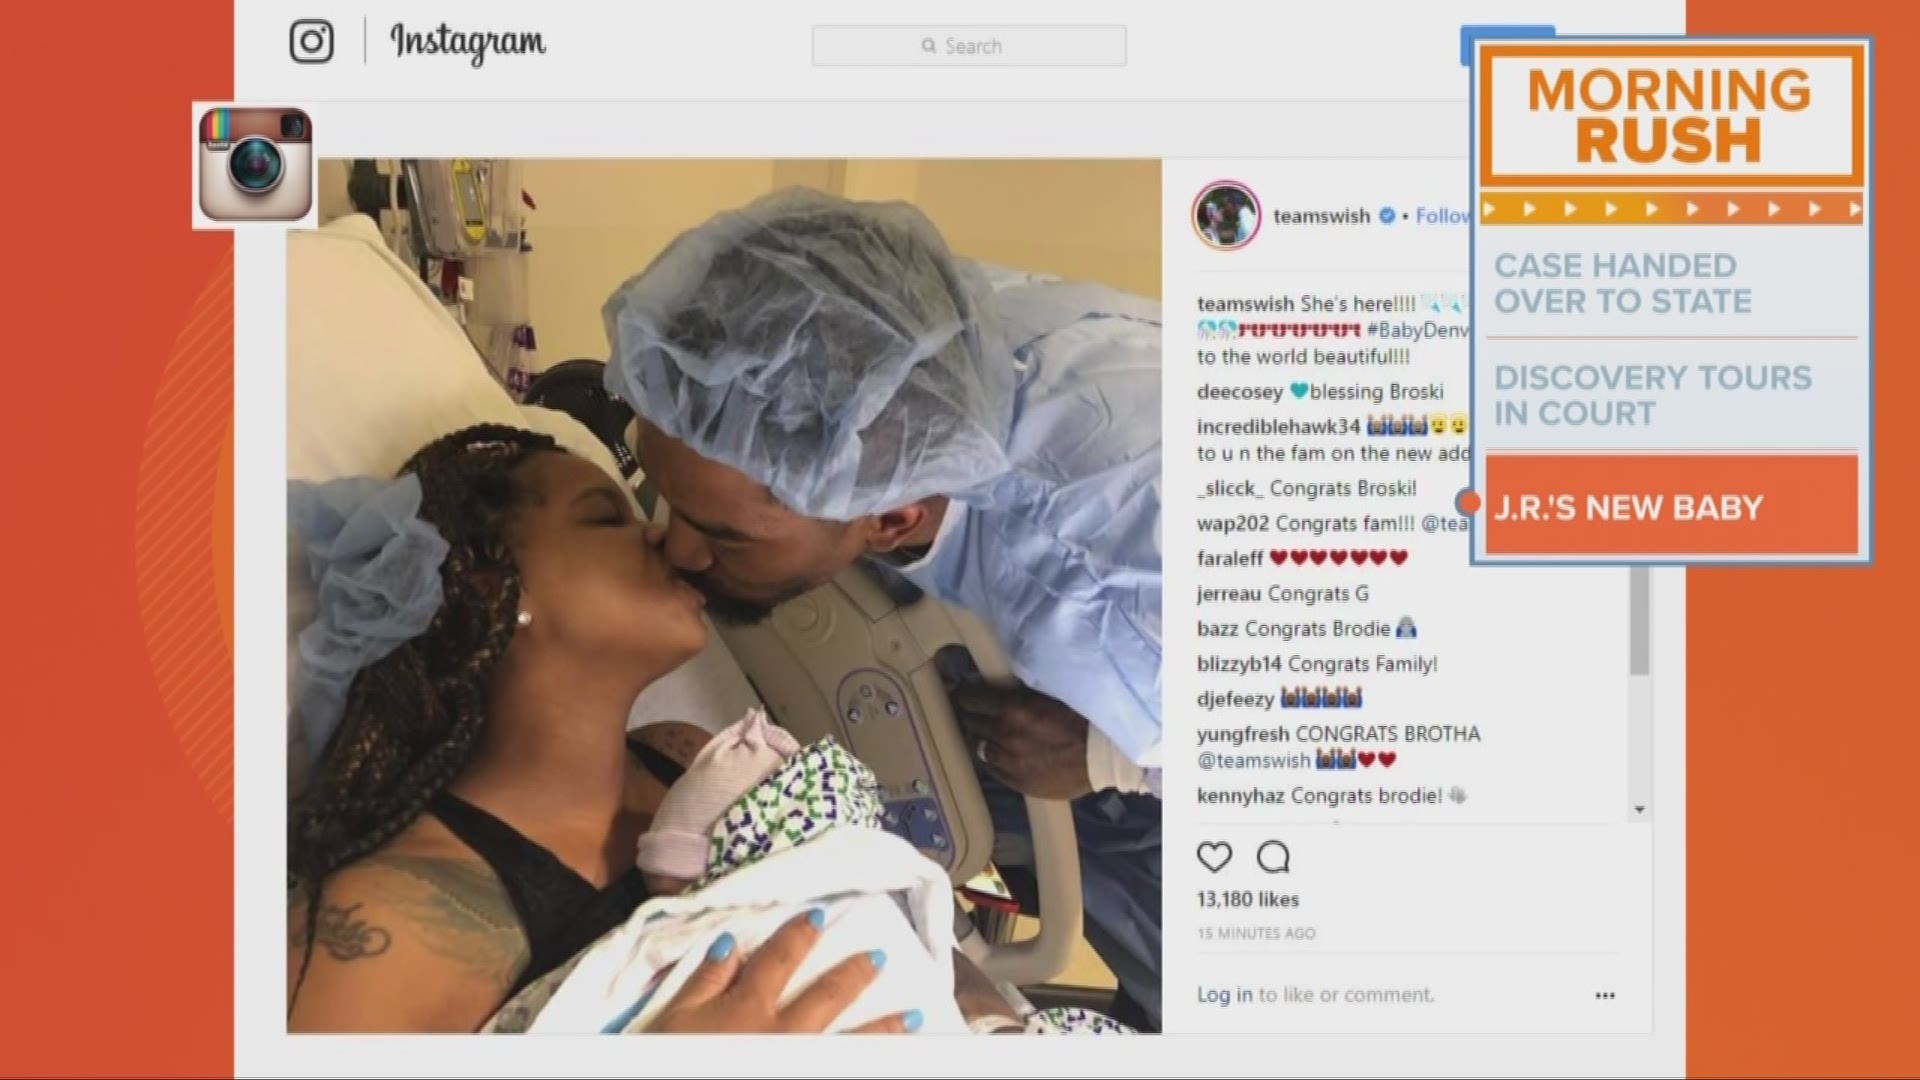 June 14, 2018: J.R. Smith is the proud father of another baby girl. Meet Denver.